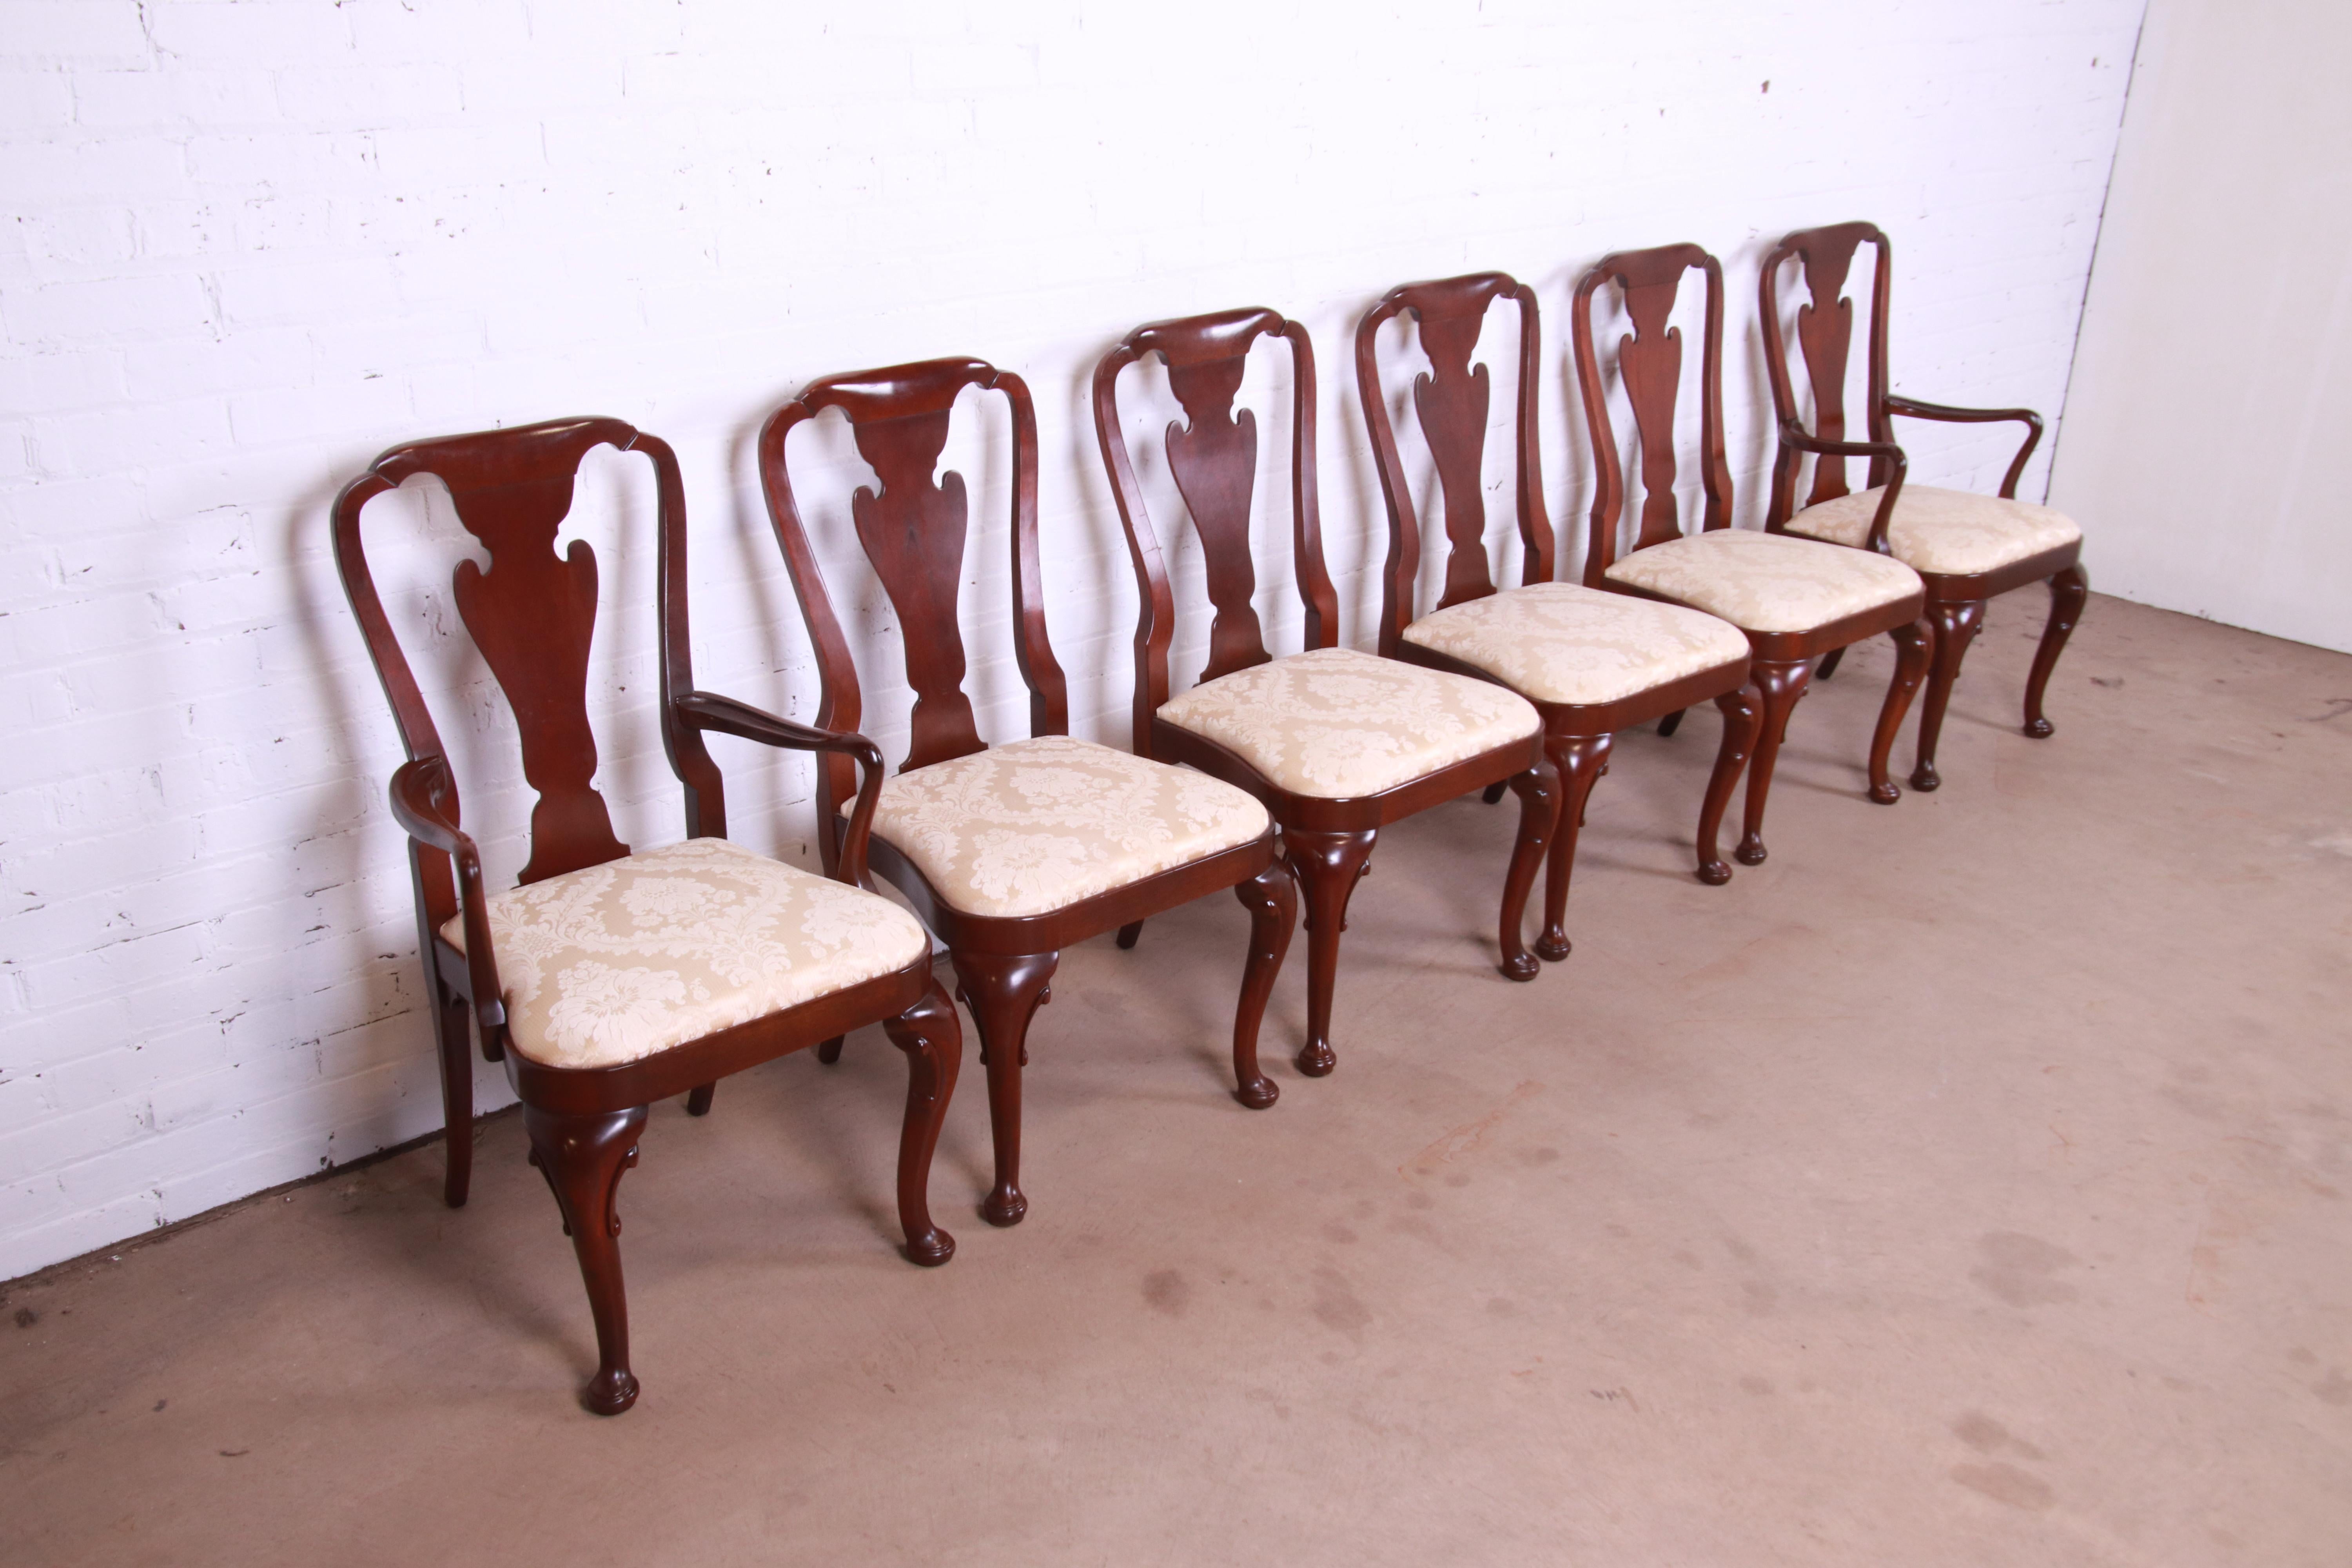 Upholstery Baker Furniture Historic Charleston Queen Anne Carved Mahogany Dining Chairs For Sale